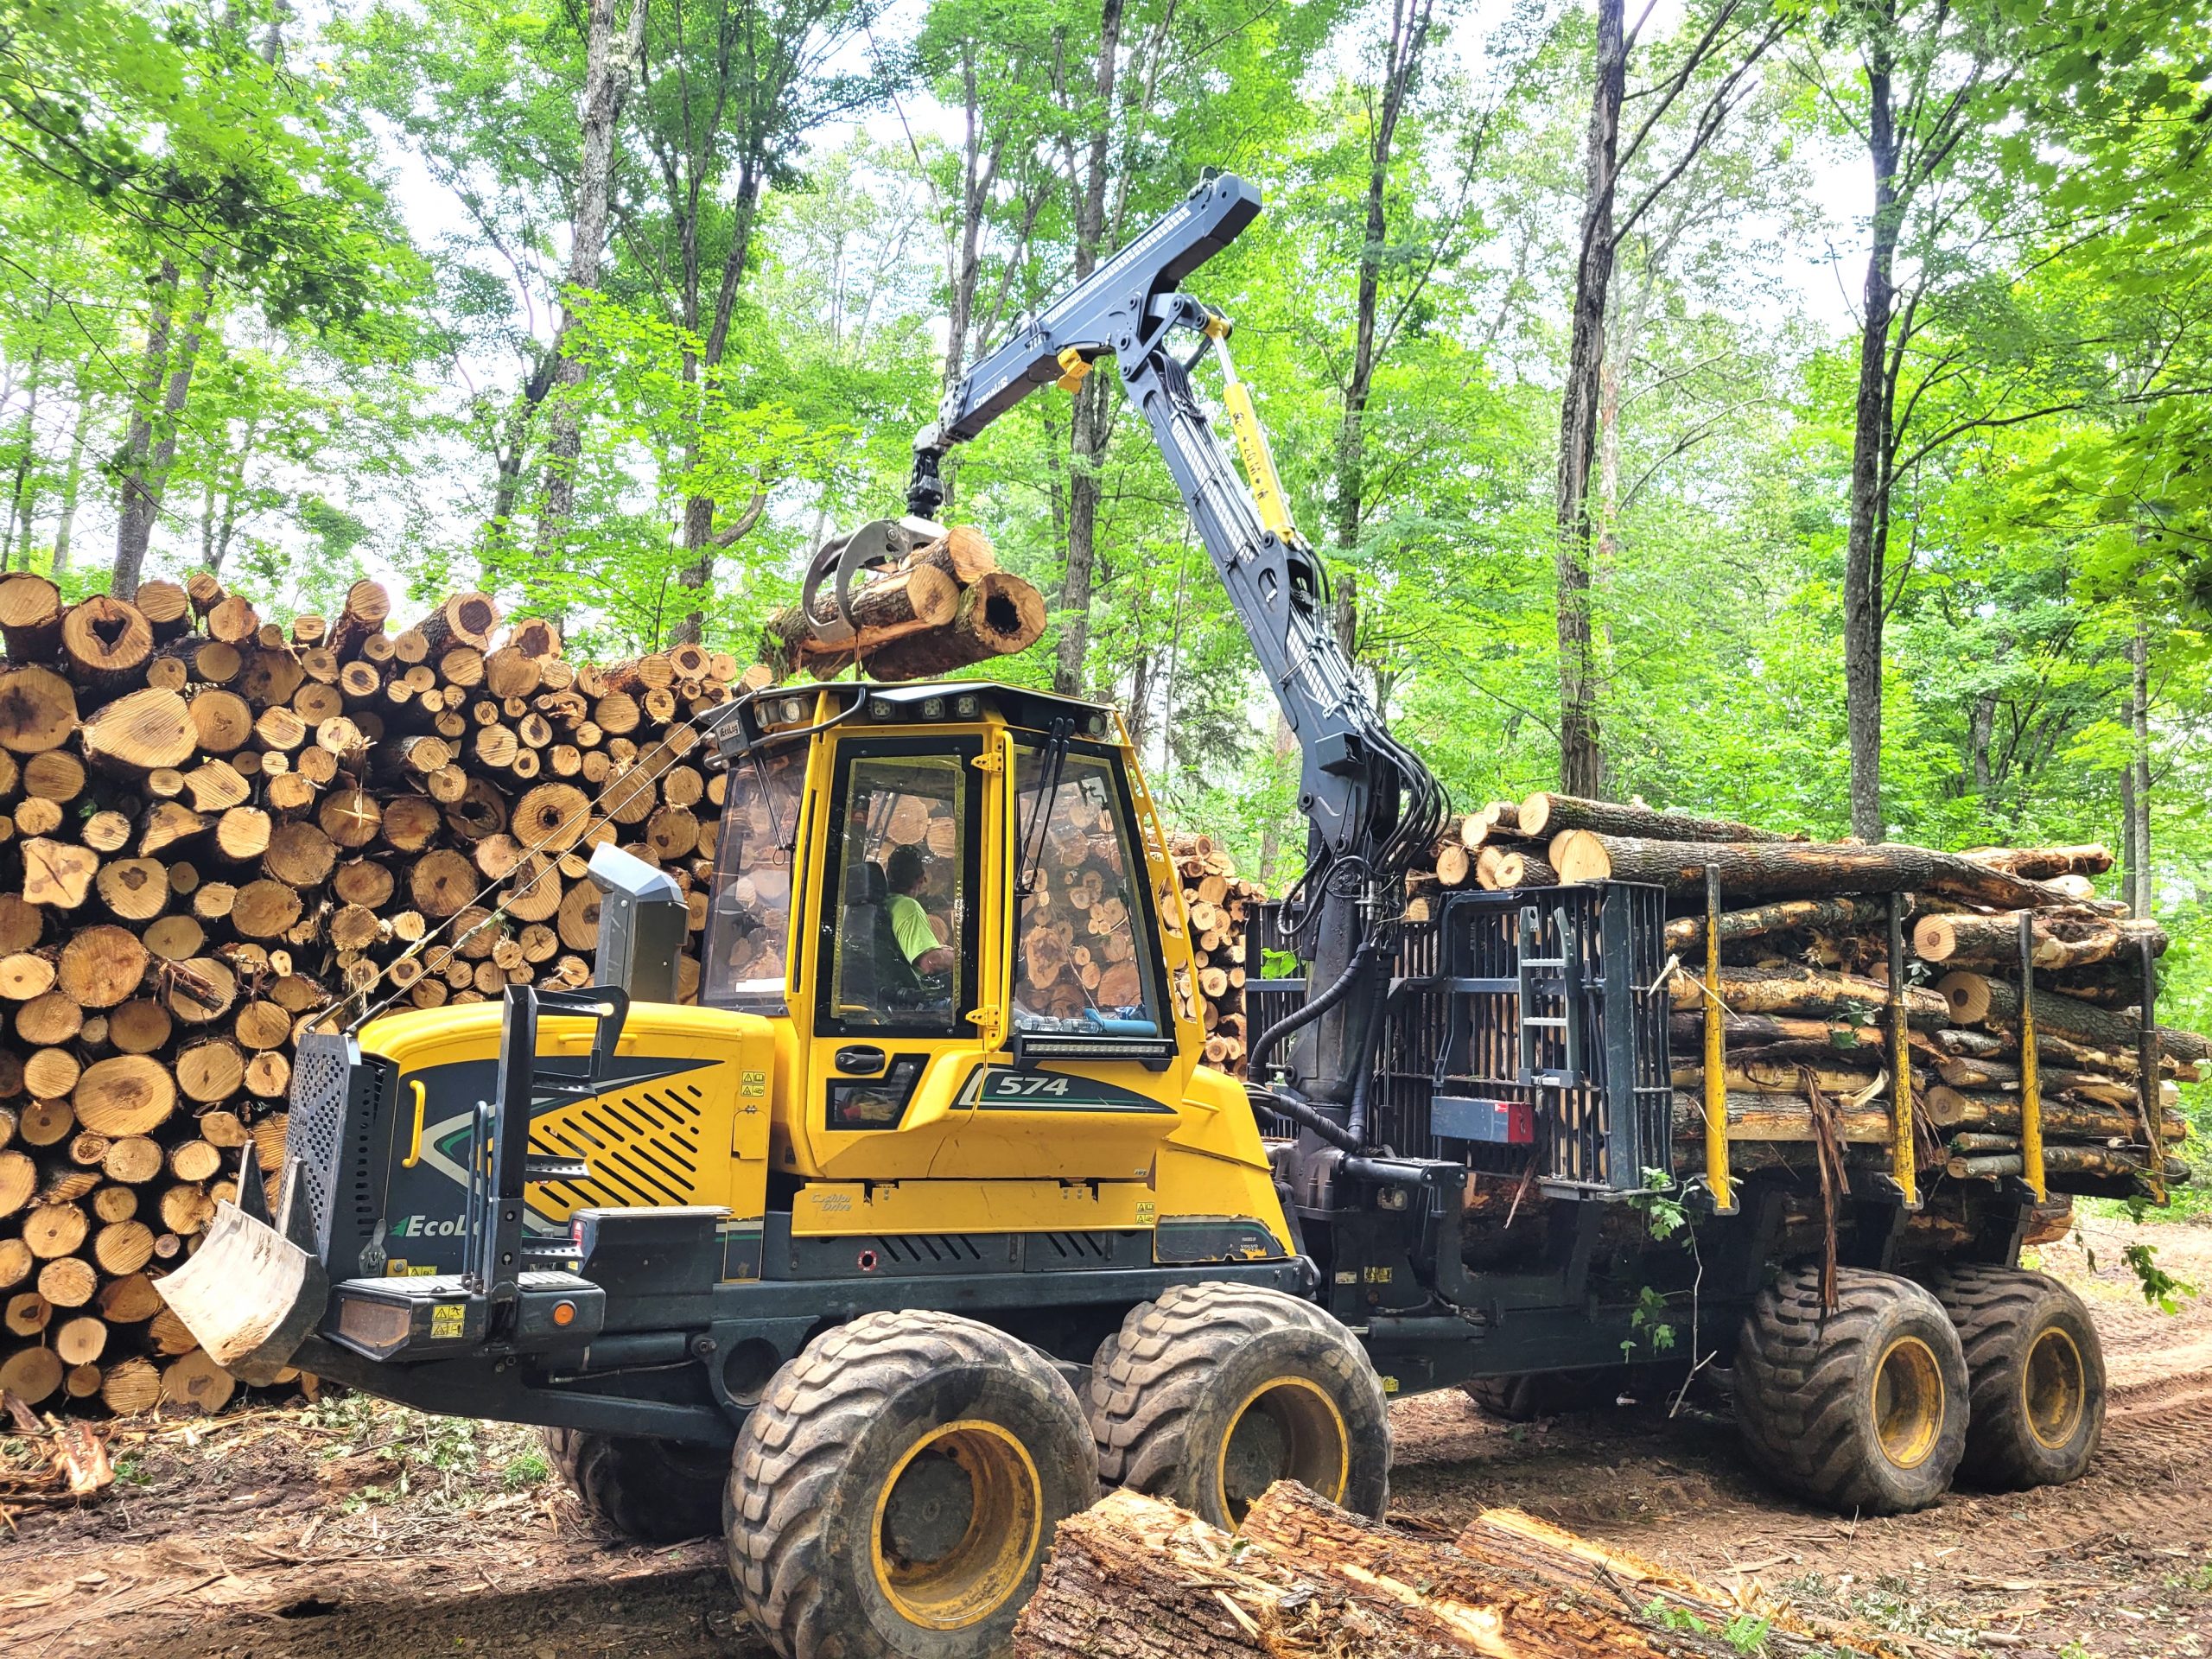   
																Wisconsin Logger Has Had Good Mentor to Help Grow His Business 
															 